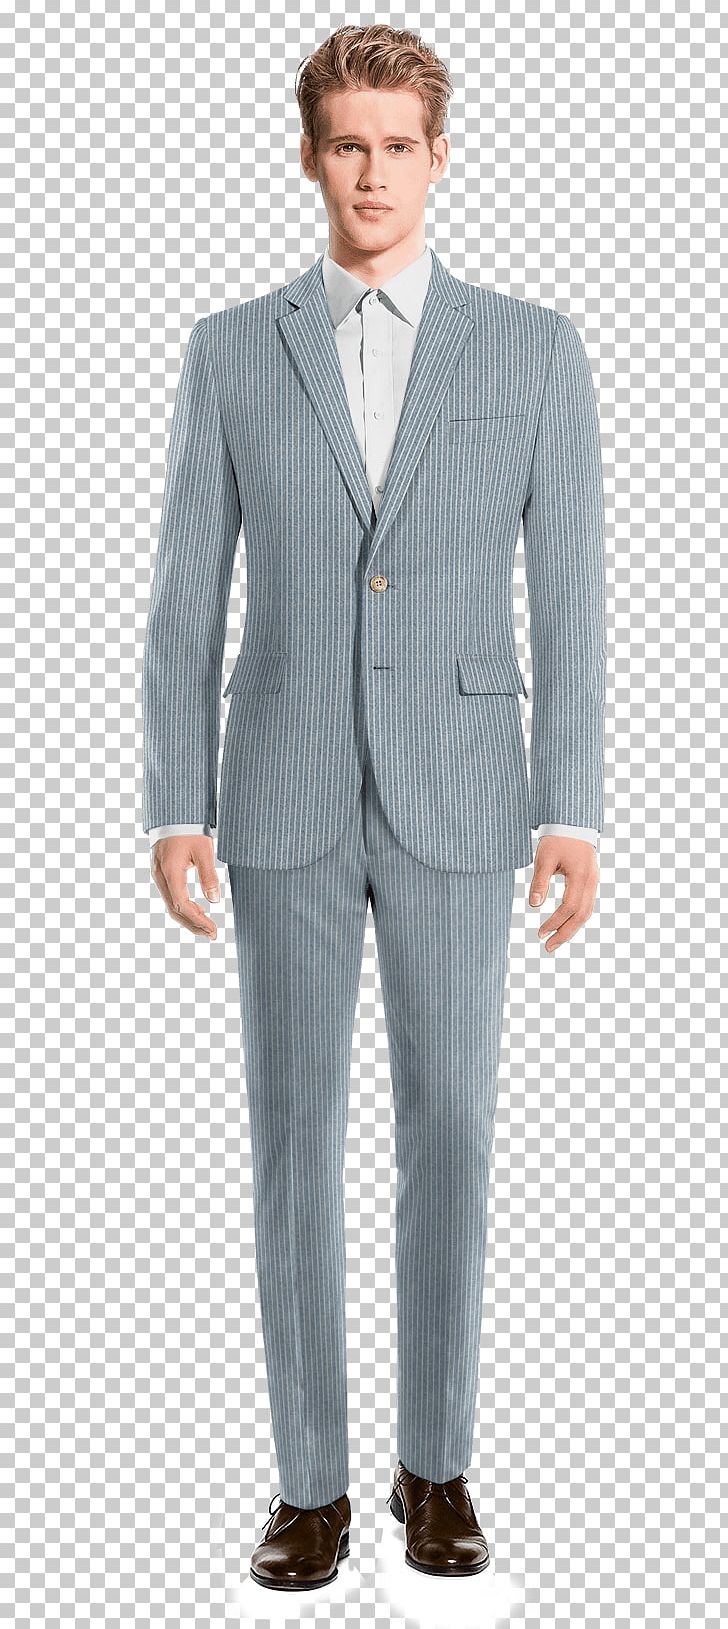 Suit Pants Tweed Chino Cloth Clothing PNG, Clipart, Blazer, Blue, Business, Businessperson, Button Free PNG Download